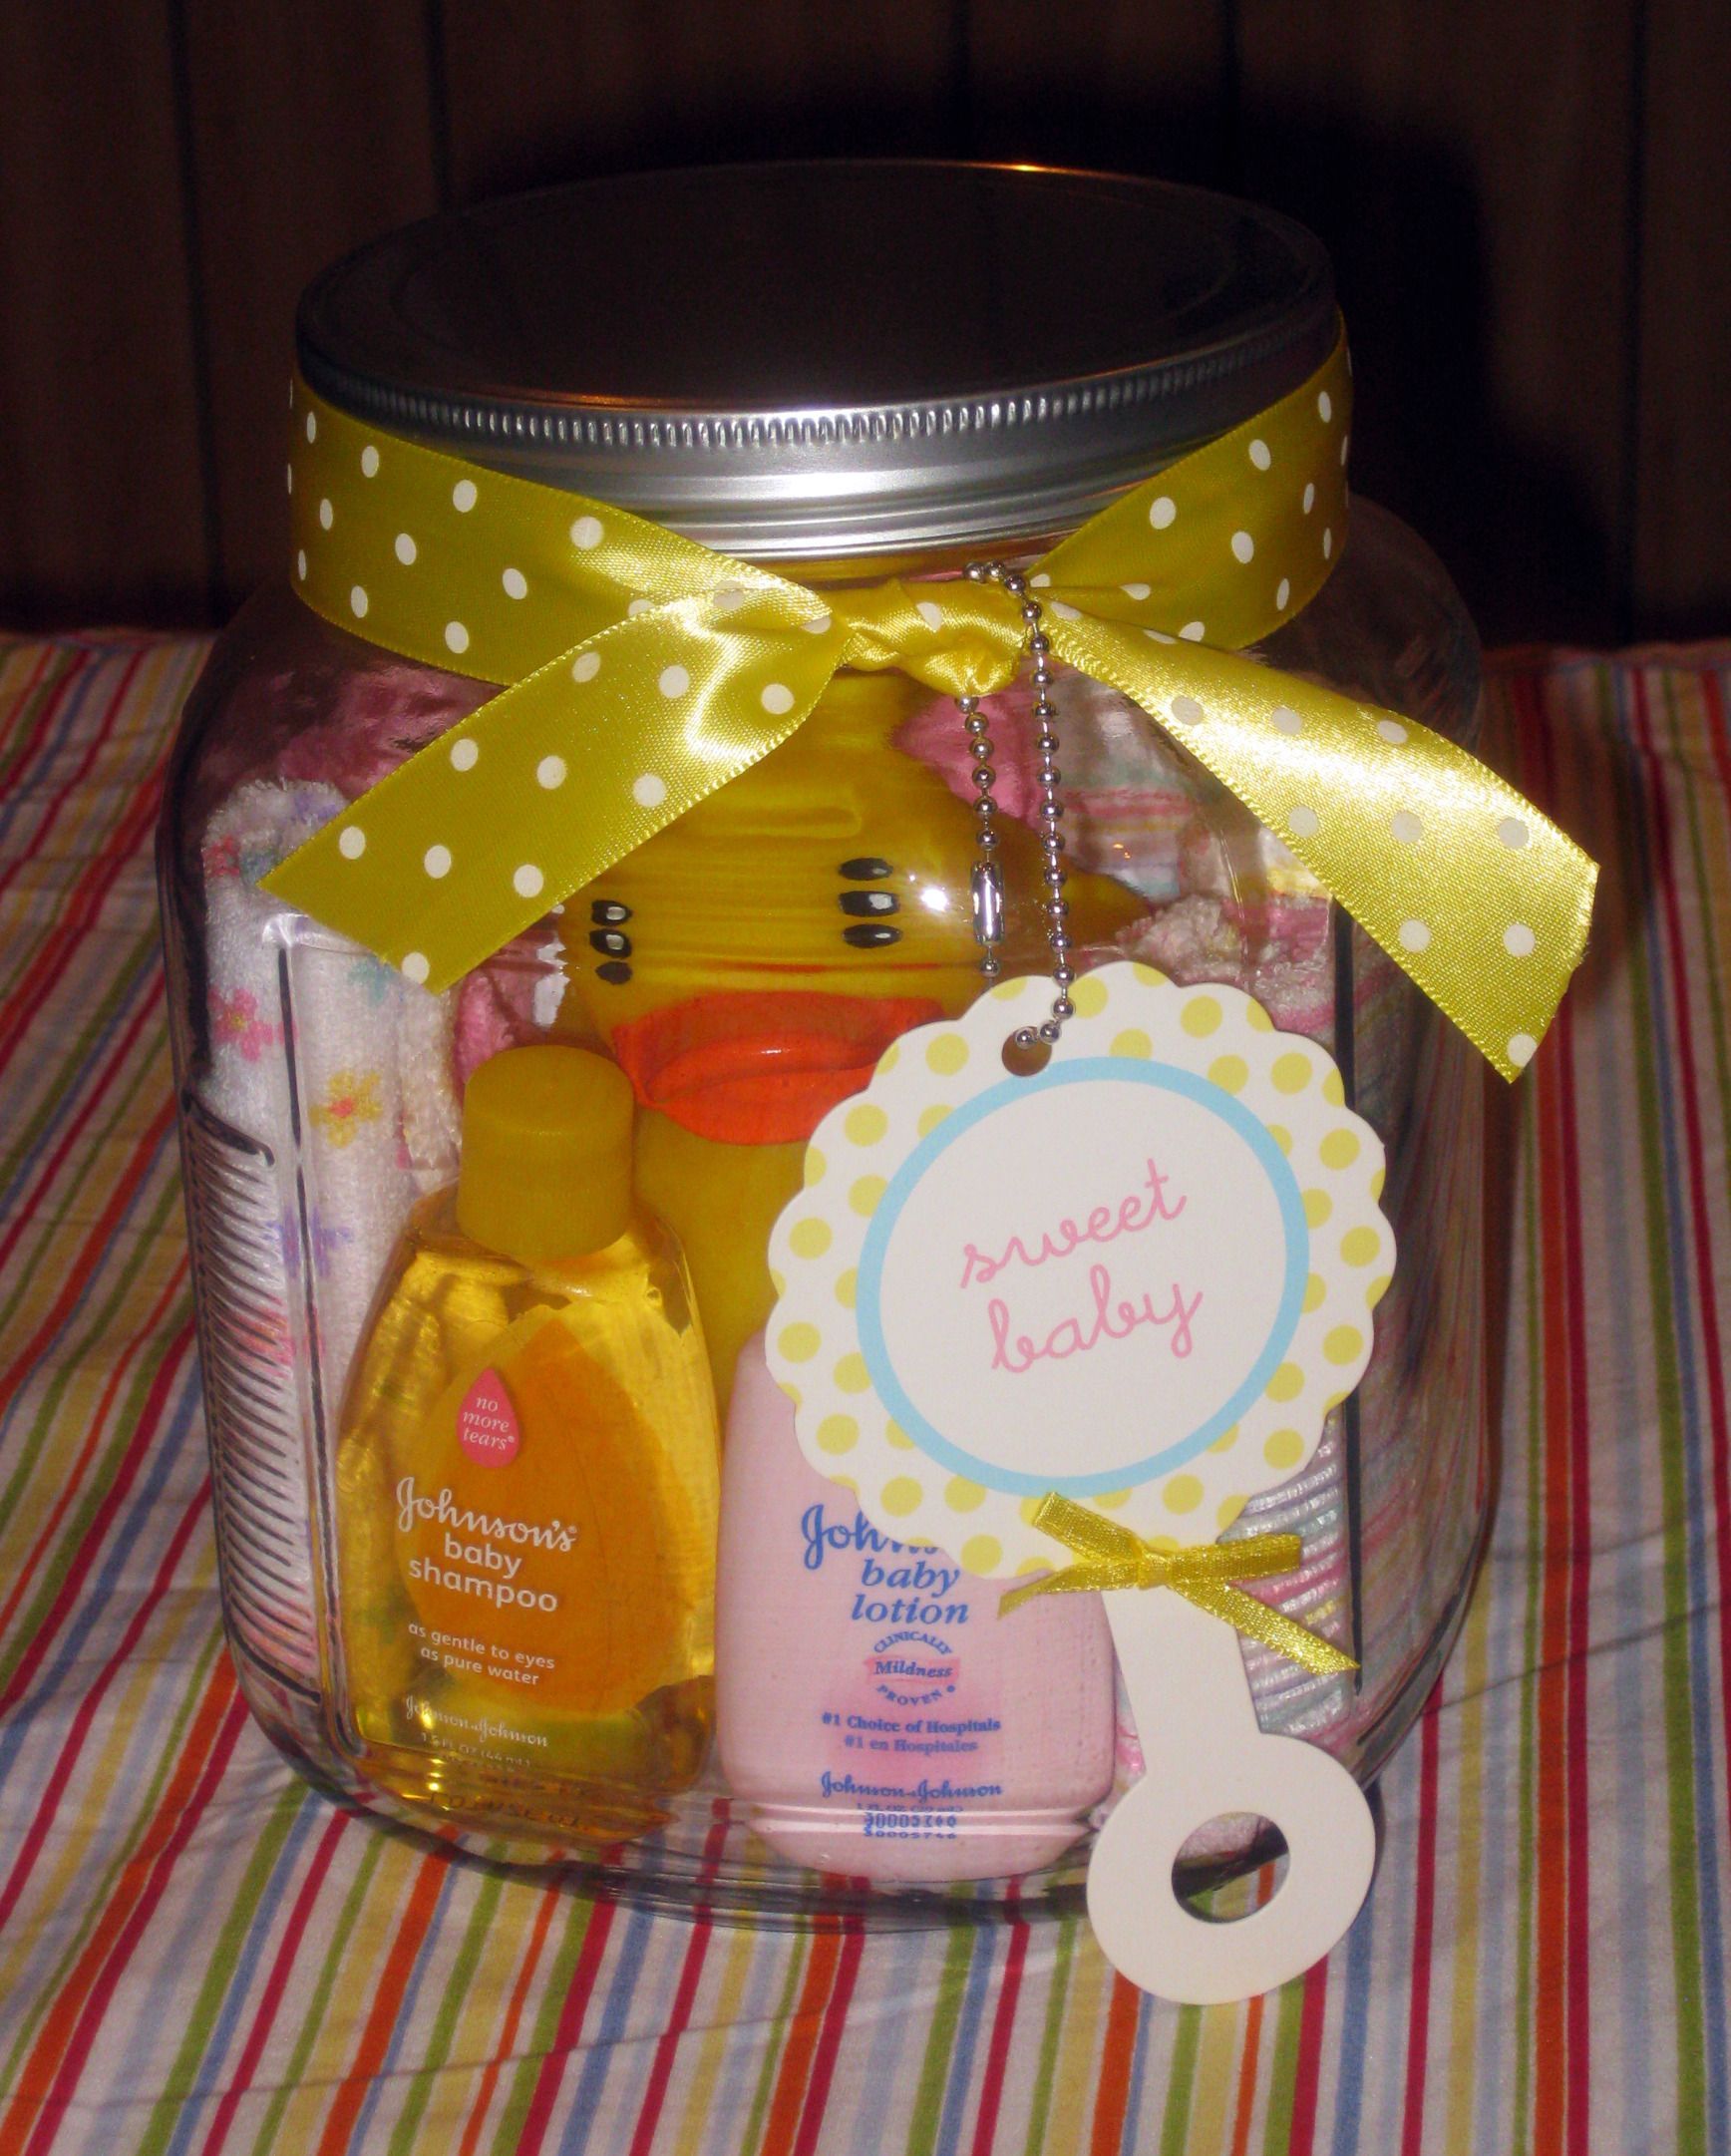 Have an upcoming baby shower? Try this simple DIY baby shower gift idea using a